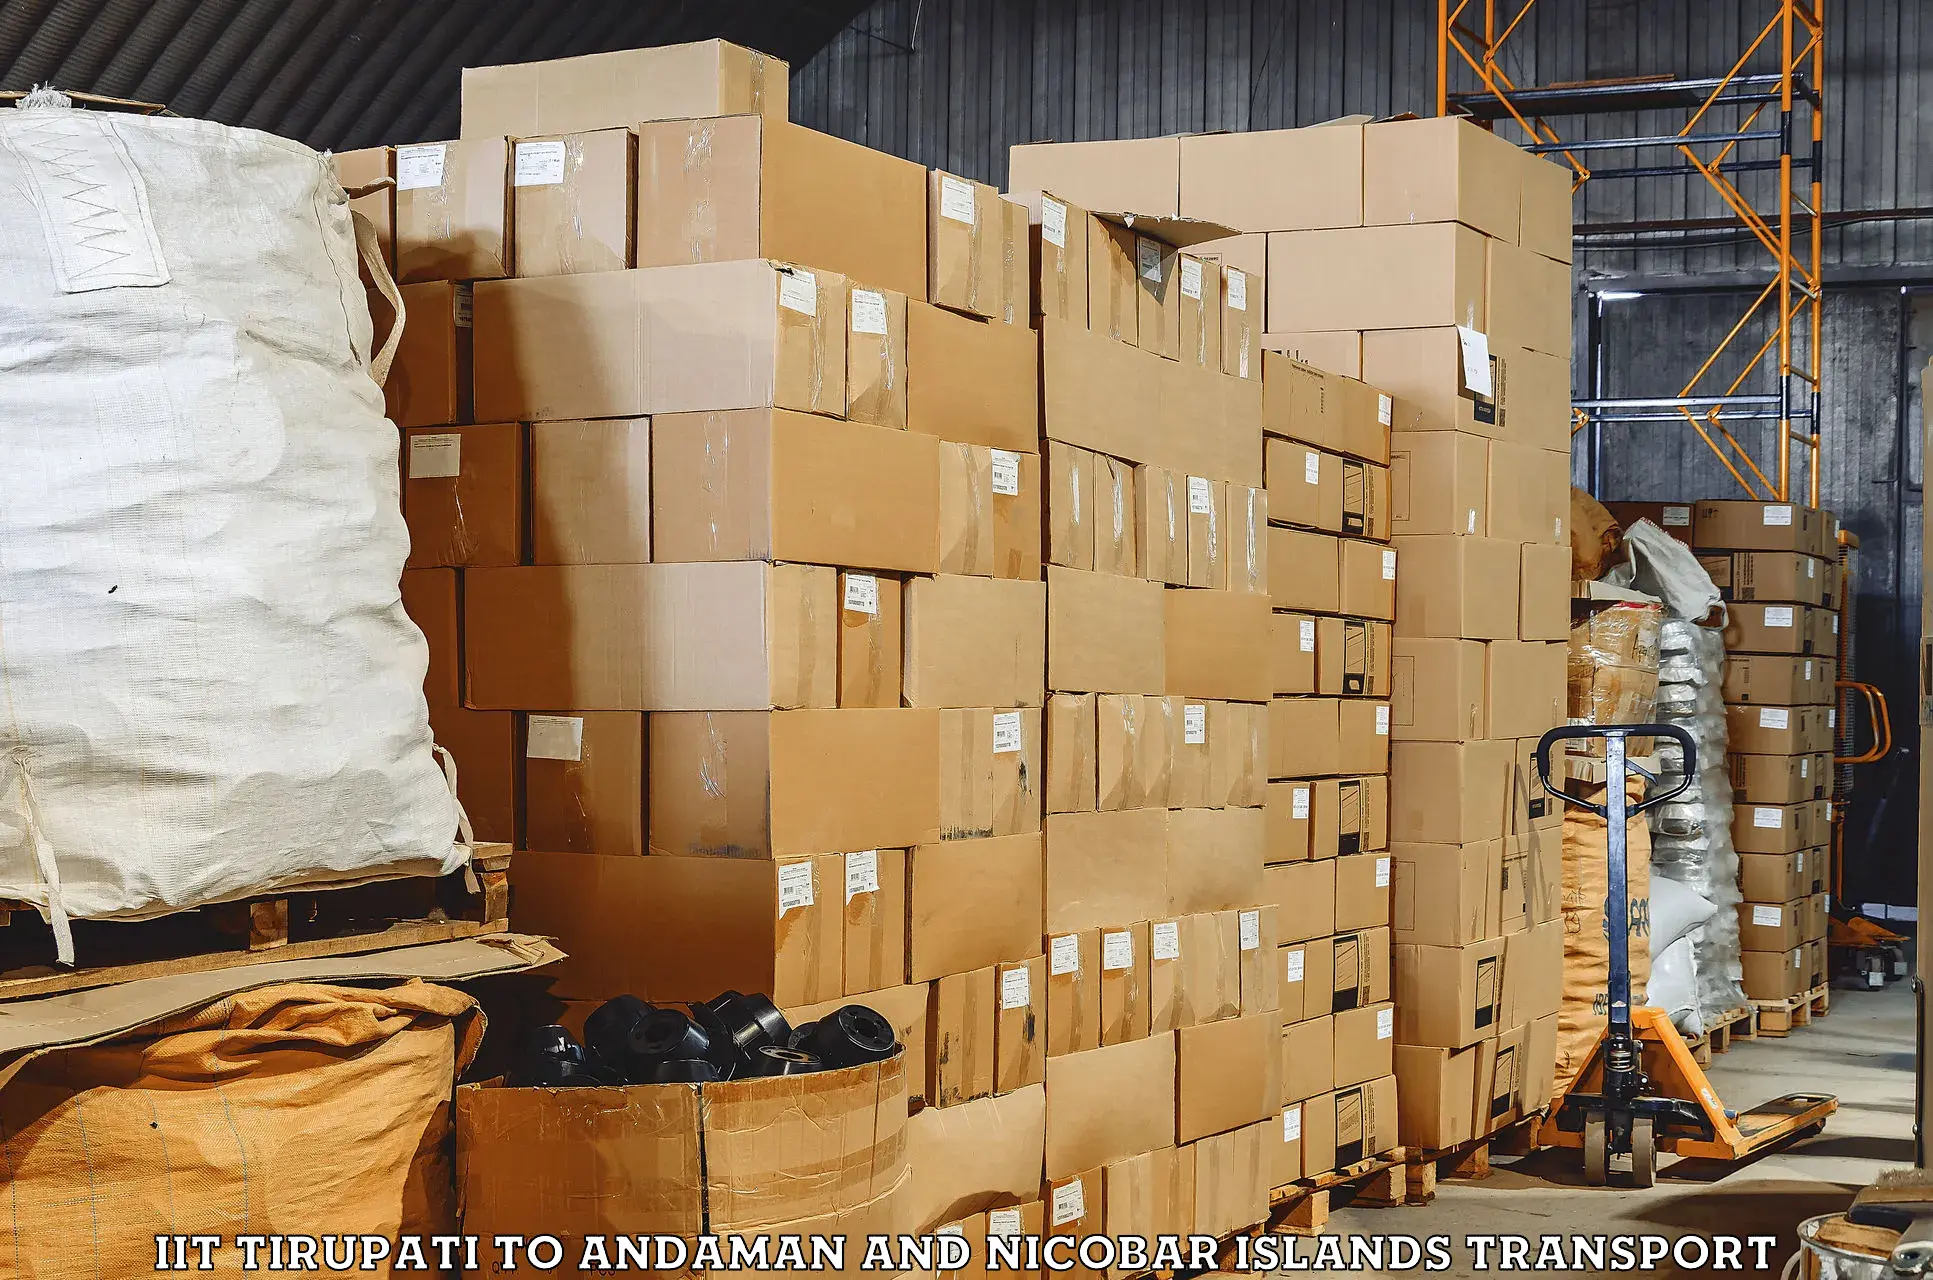 Cargo train transport services in IIT Tirupati to Andaman and Nicobar Islands